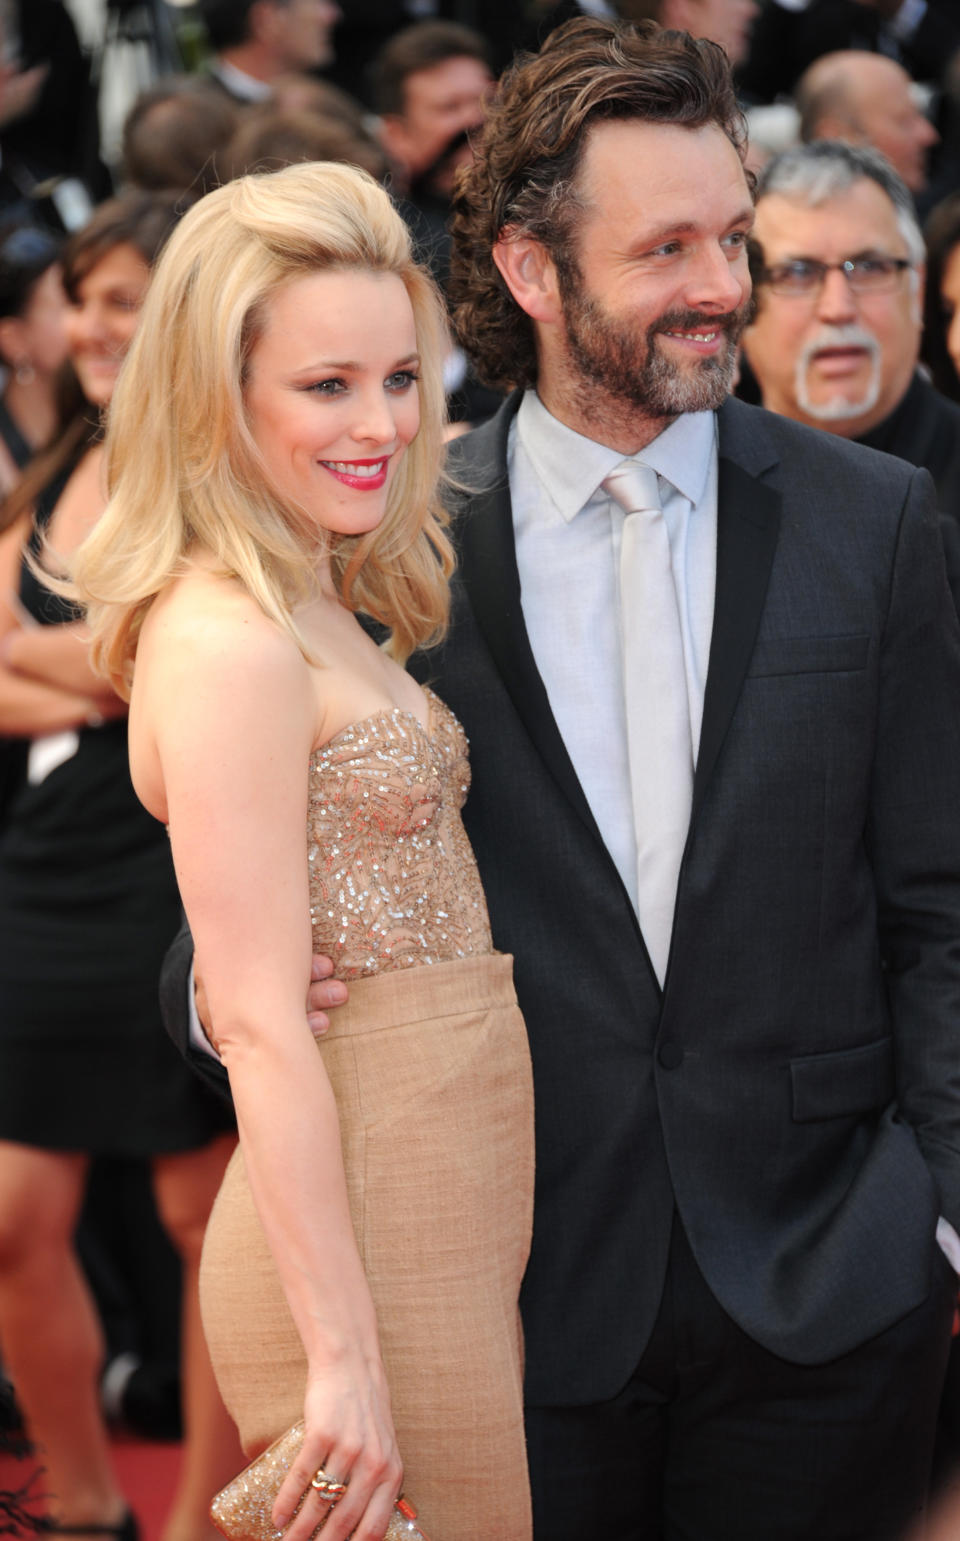 Rachel Mcadams and Michael Sheen arrive at the premiere of Sleeping Beauty, part of the 64TH Cannes Film Festival, Palais De Festival, Cannes.